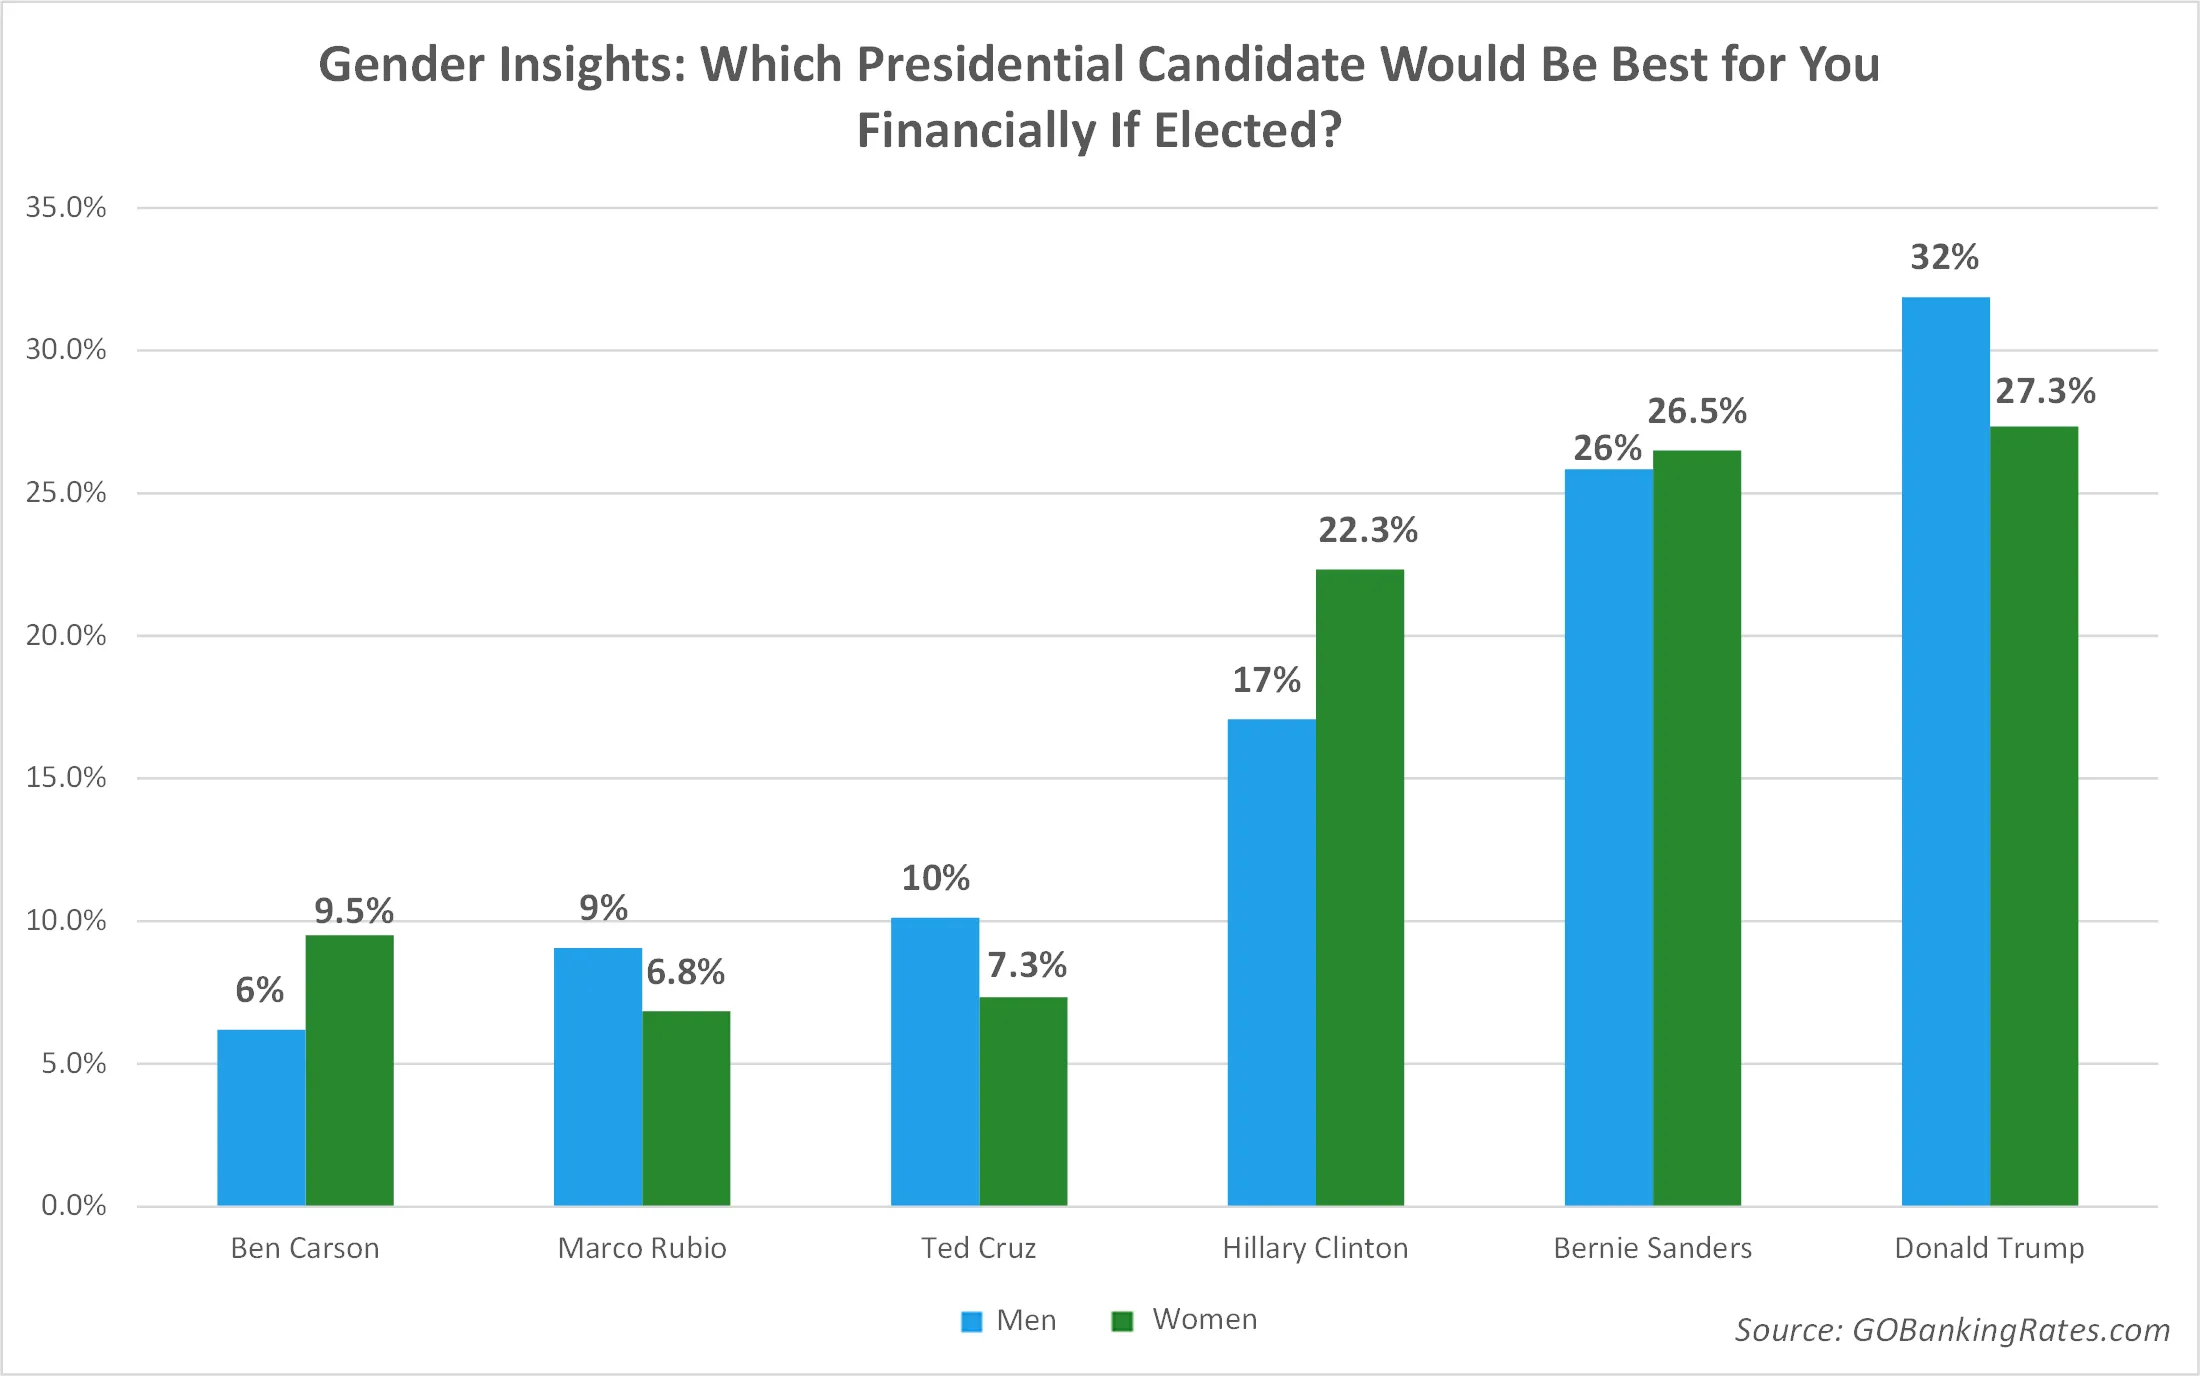 Gender Insights: Which Presidential Candidate Would Be Best for You Financially If Elected?